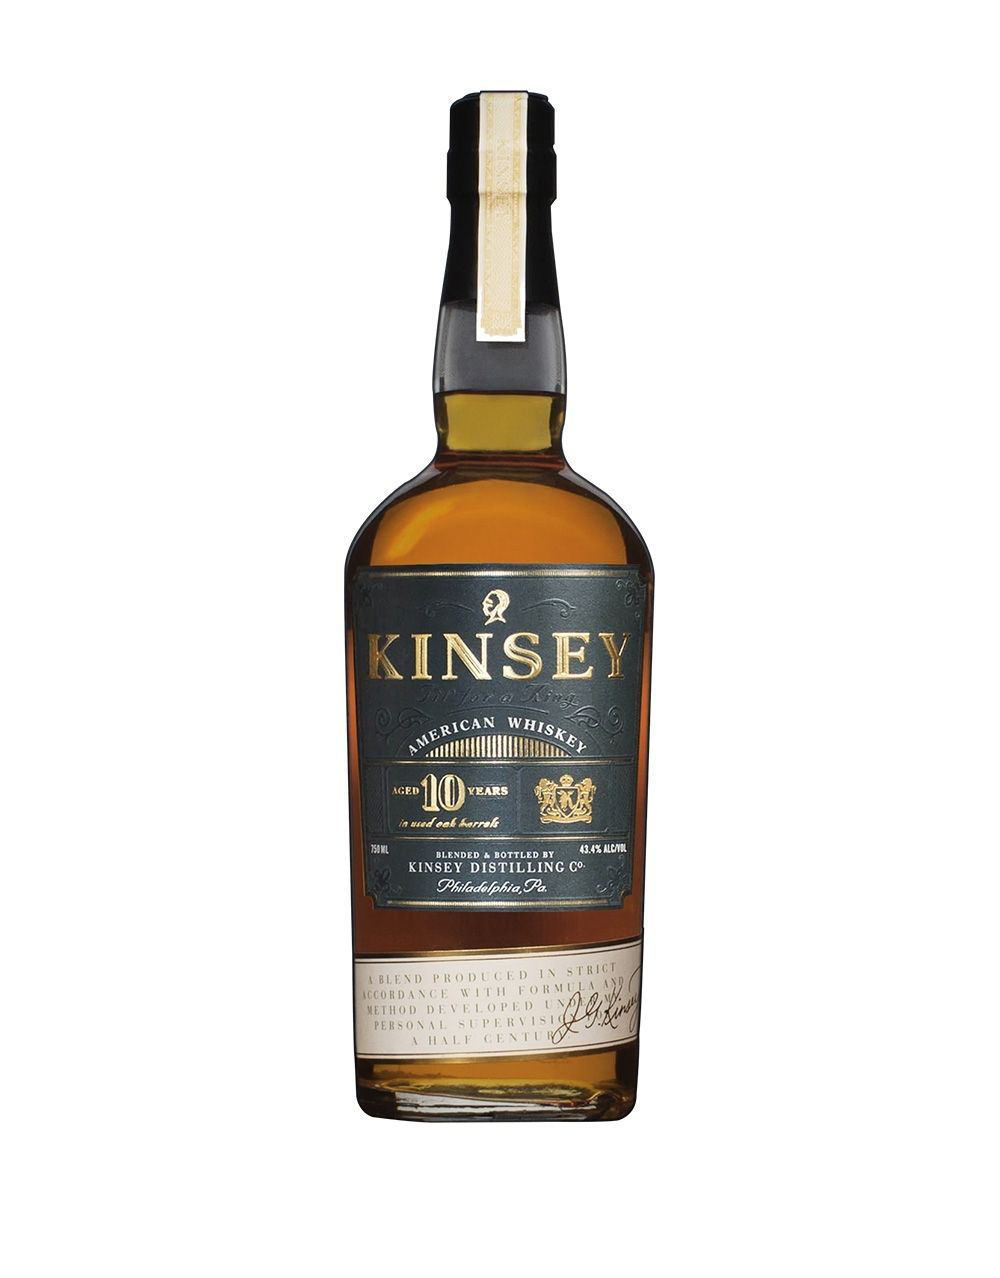 Kinsey 10 Year Old American Whiskey